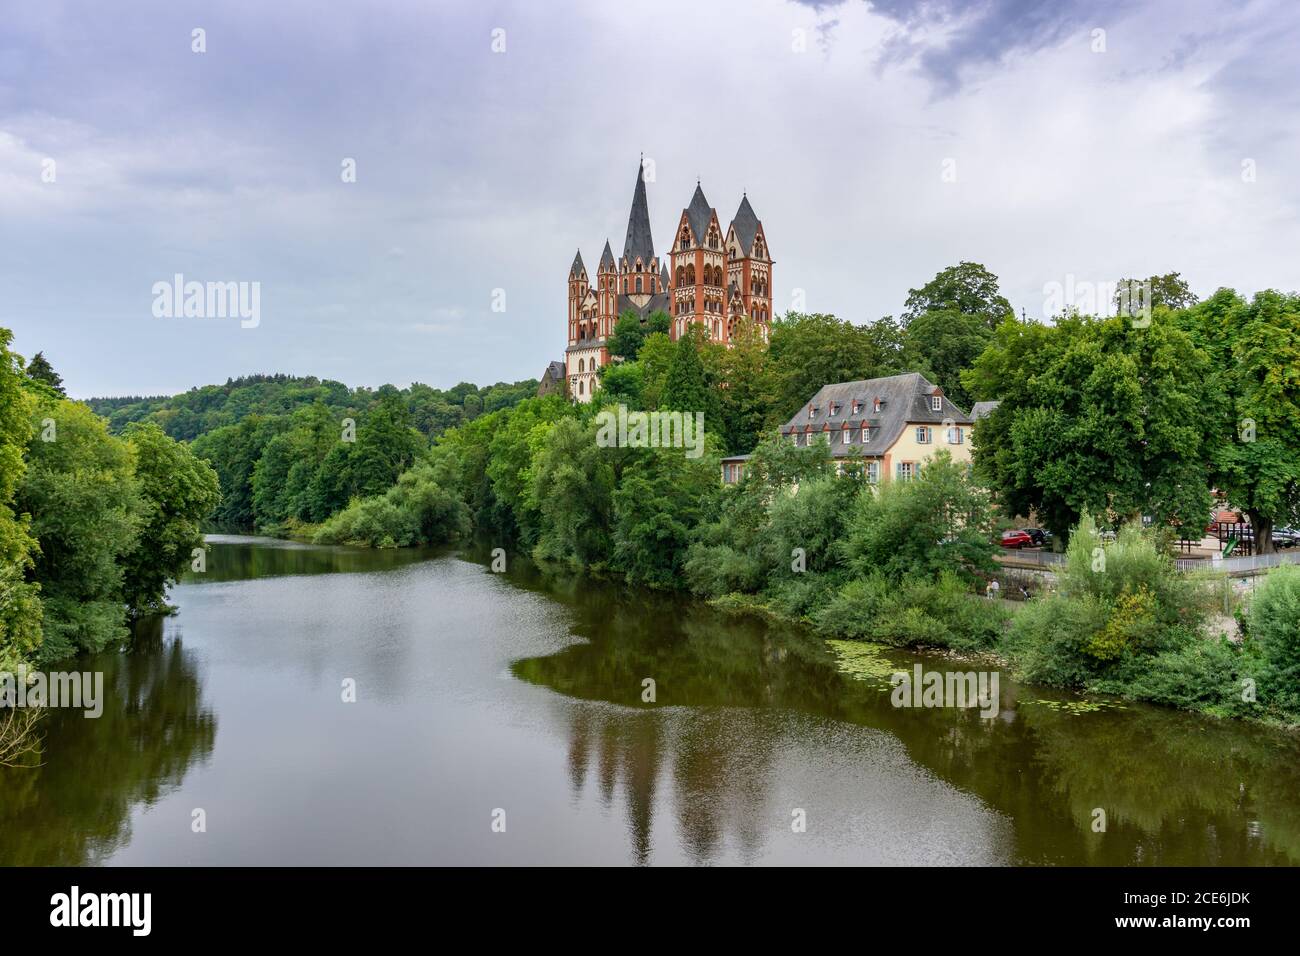 A view of the cathedral in Limburg on the Lahn River Stock Photo